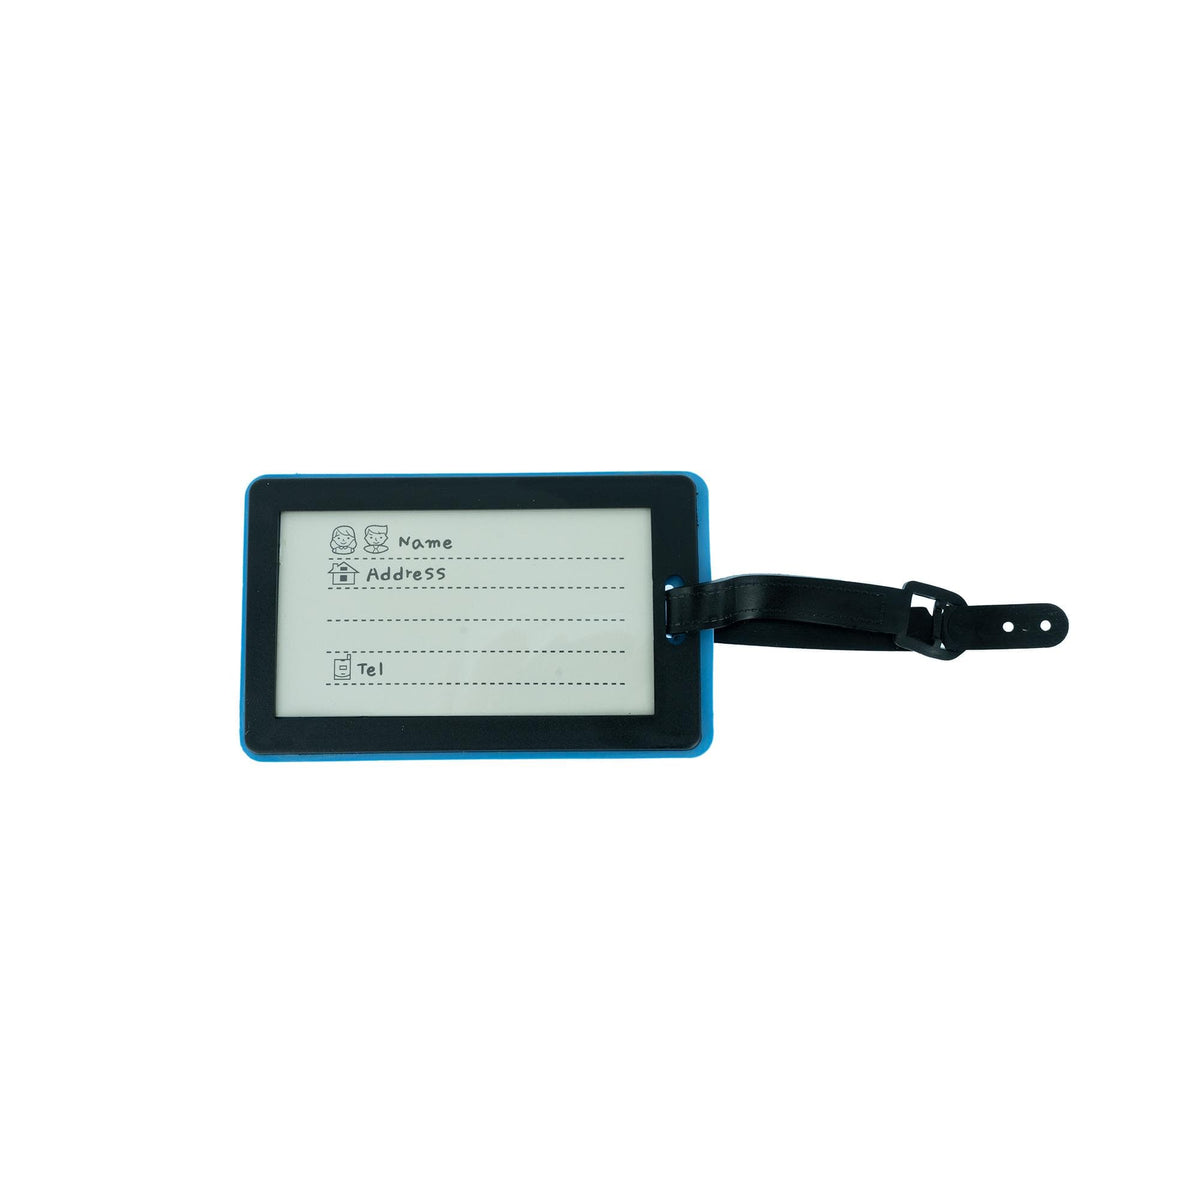 Musical Journey Luggage Tag - Blue